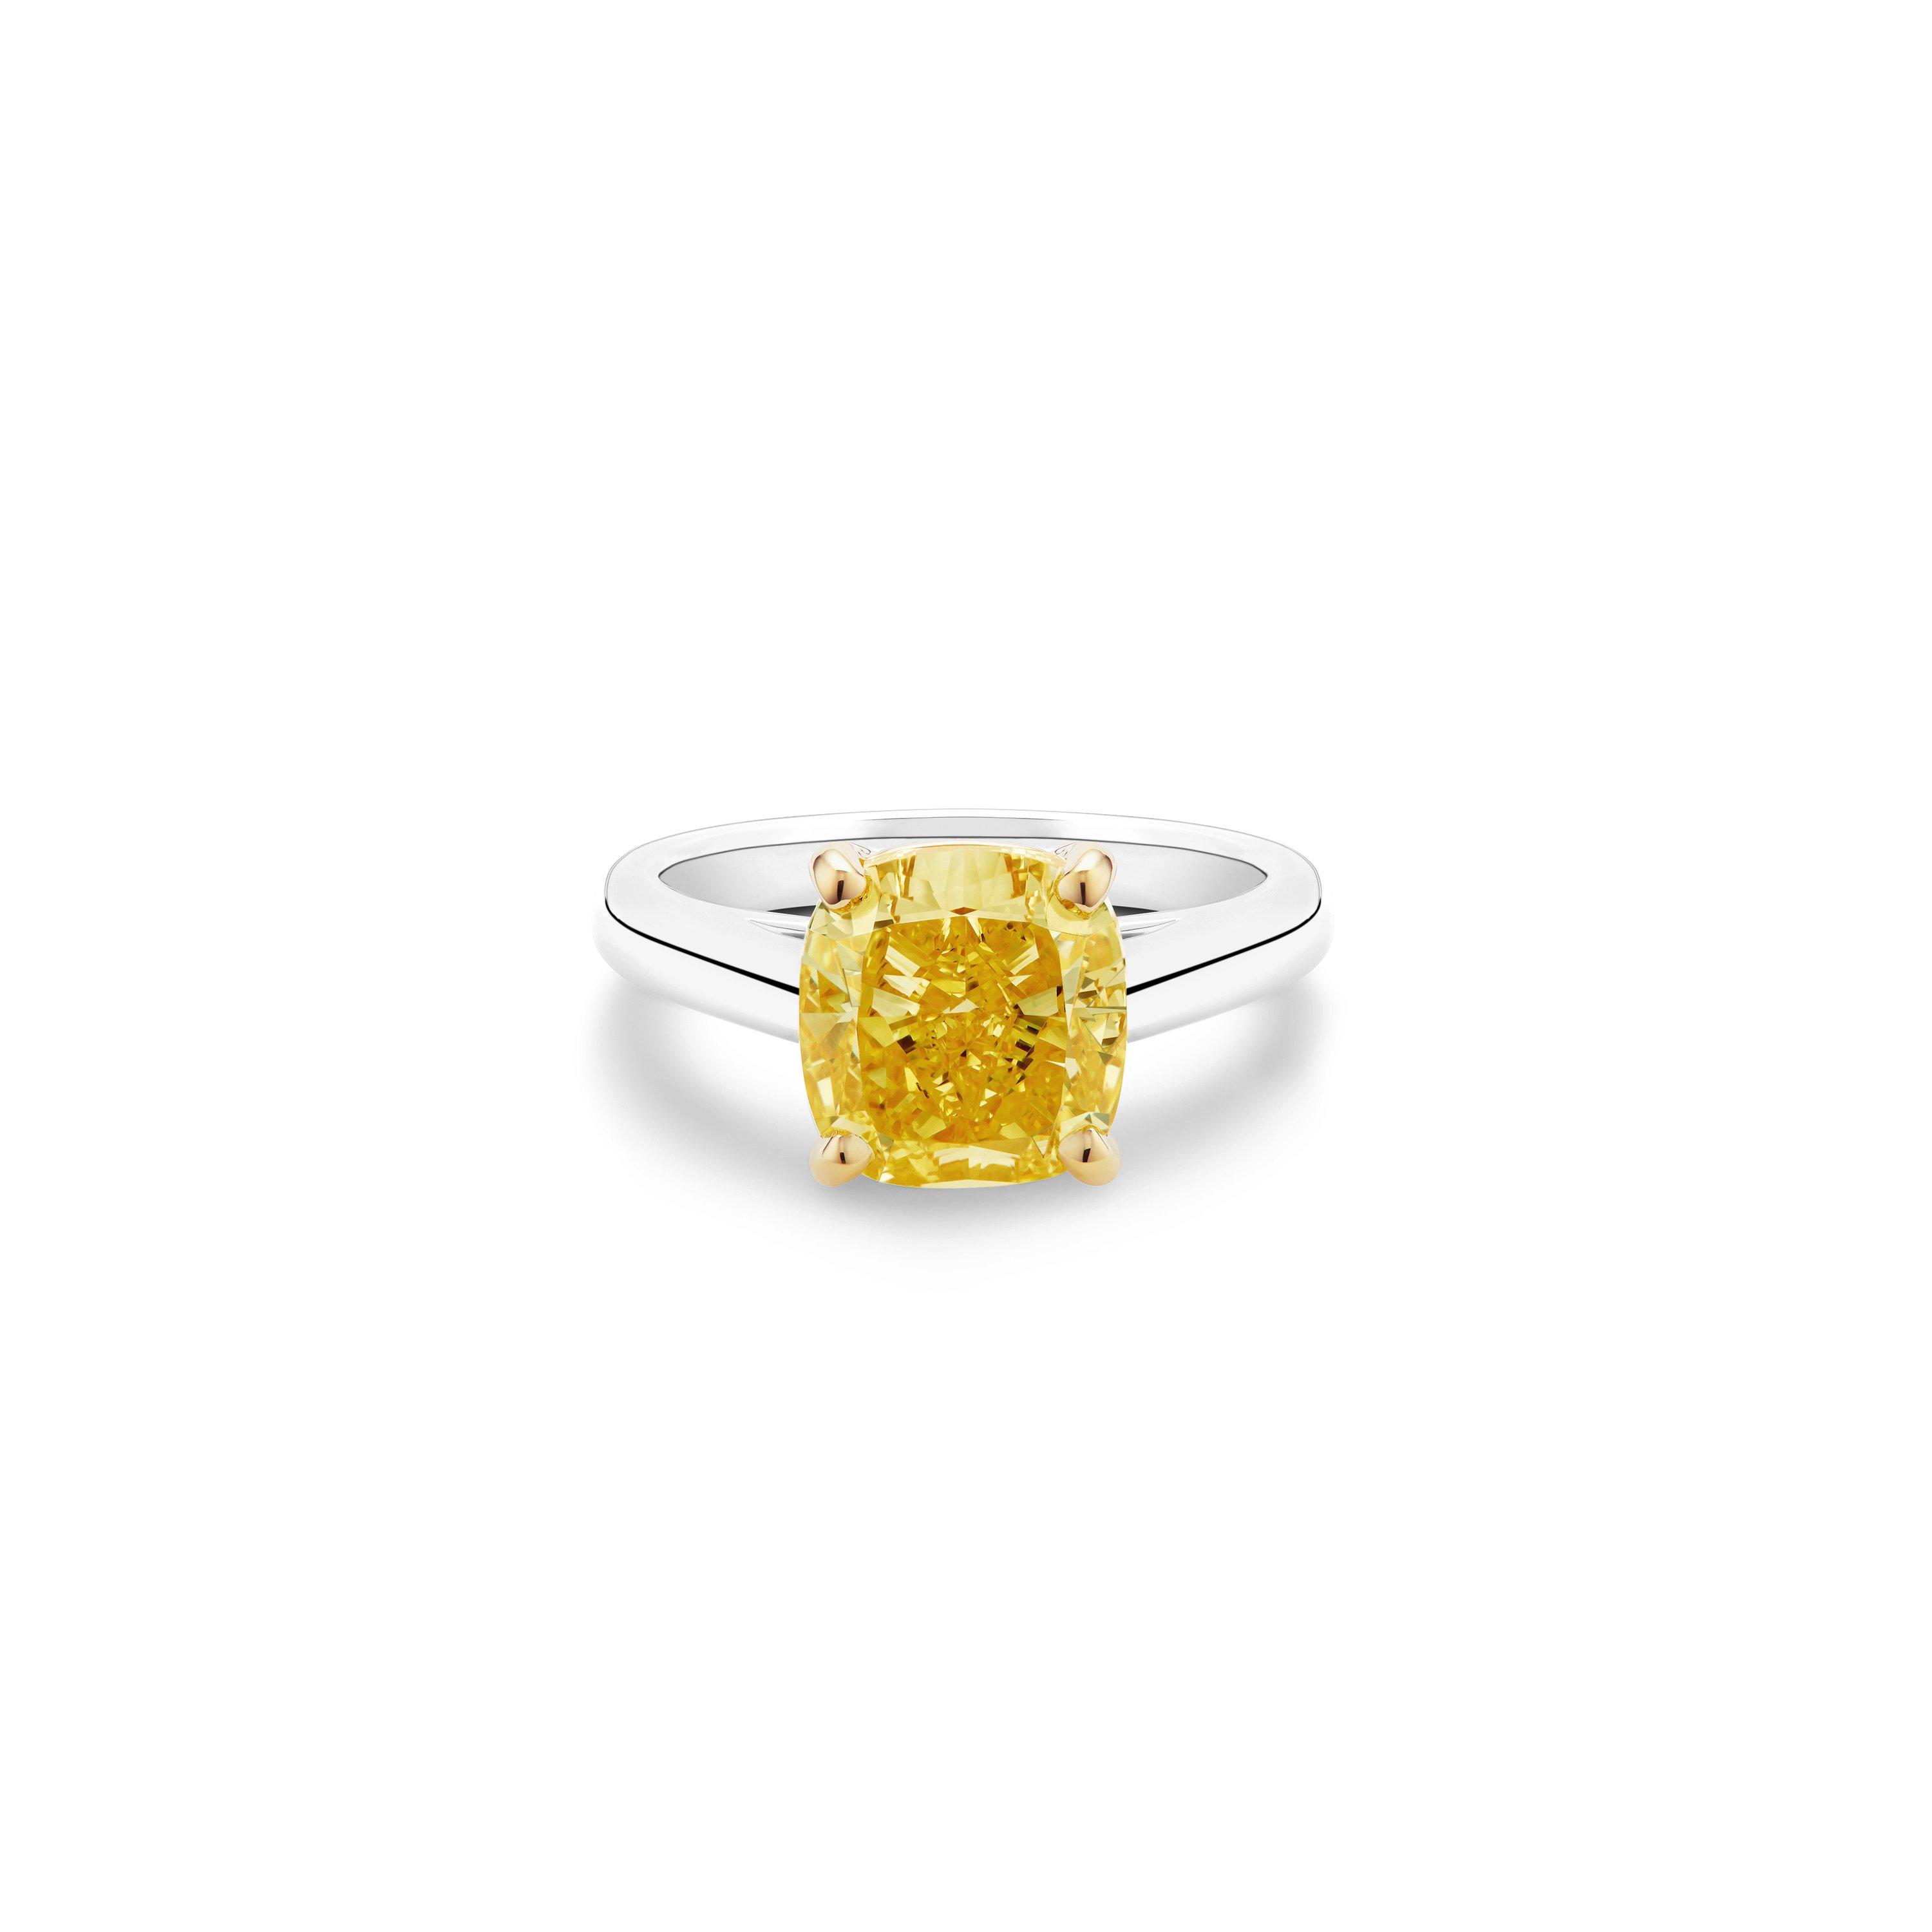 Tiffany & Co. Fancy Yellow Cushion Diamond Solitaire Engagement Ring